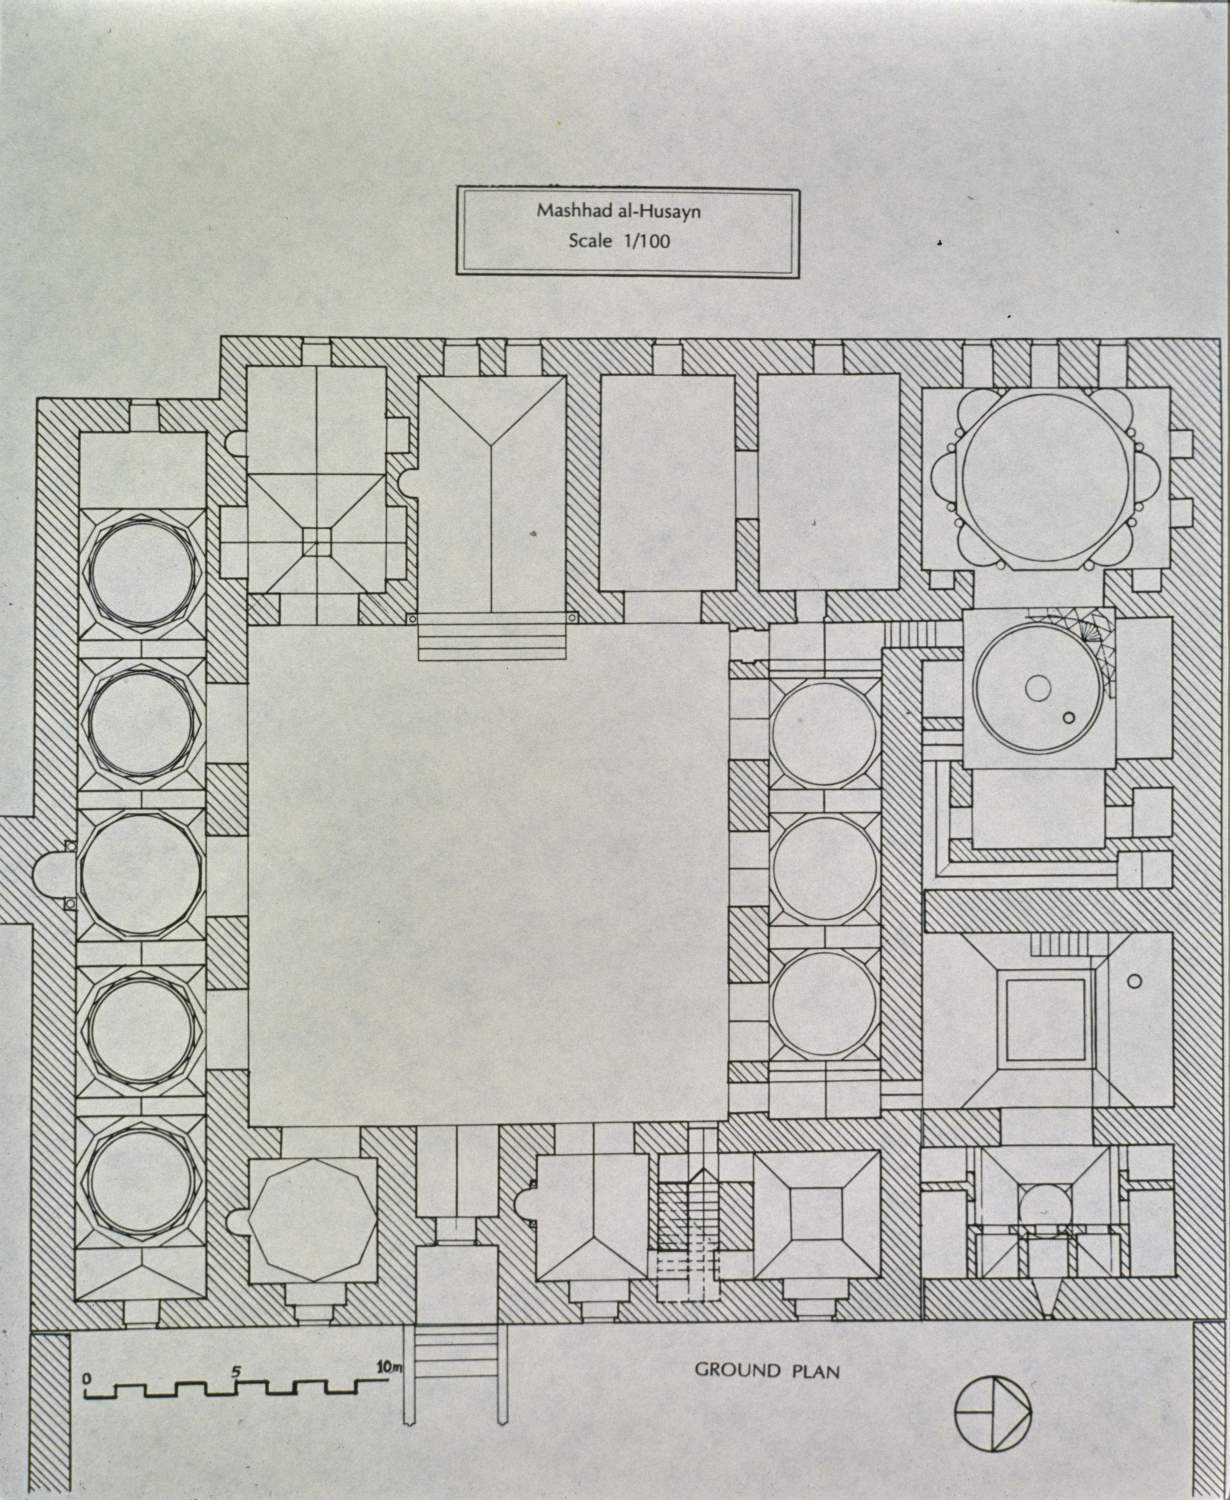 Ground plan of main structure (eastern enclosure not included).